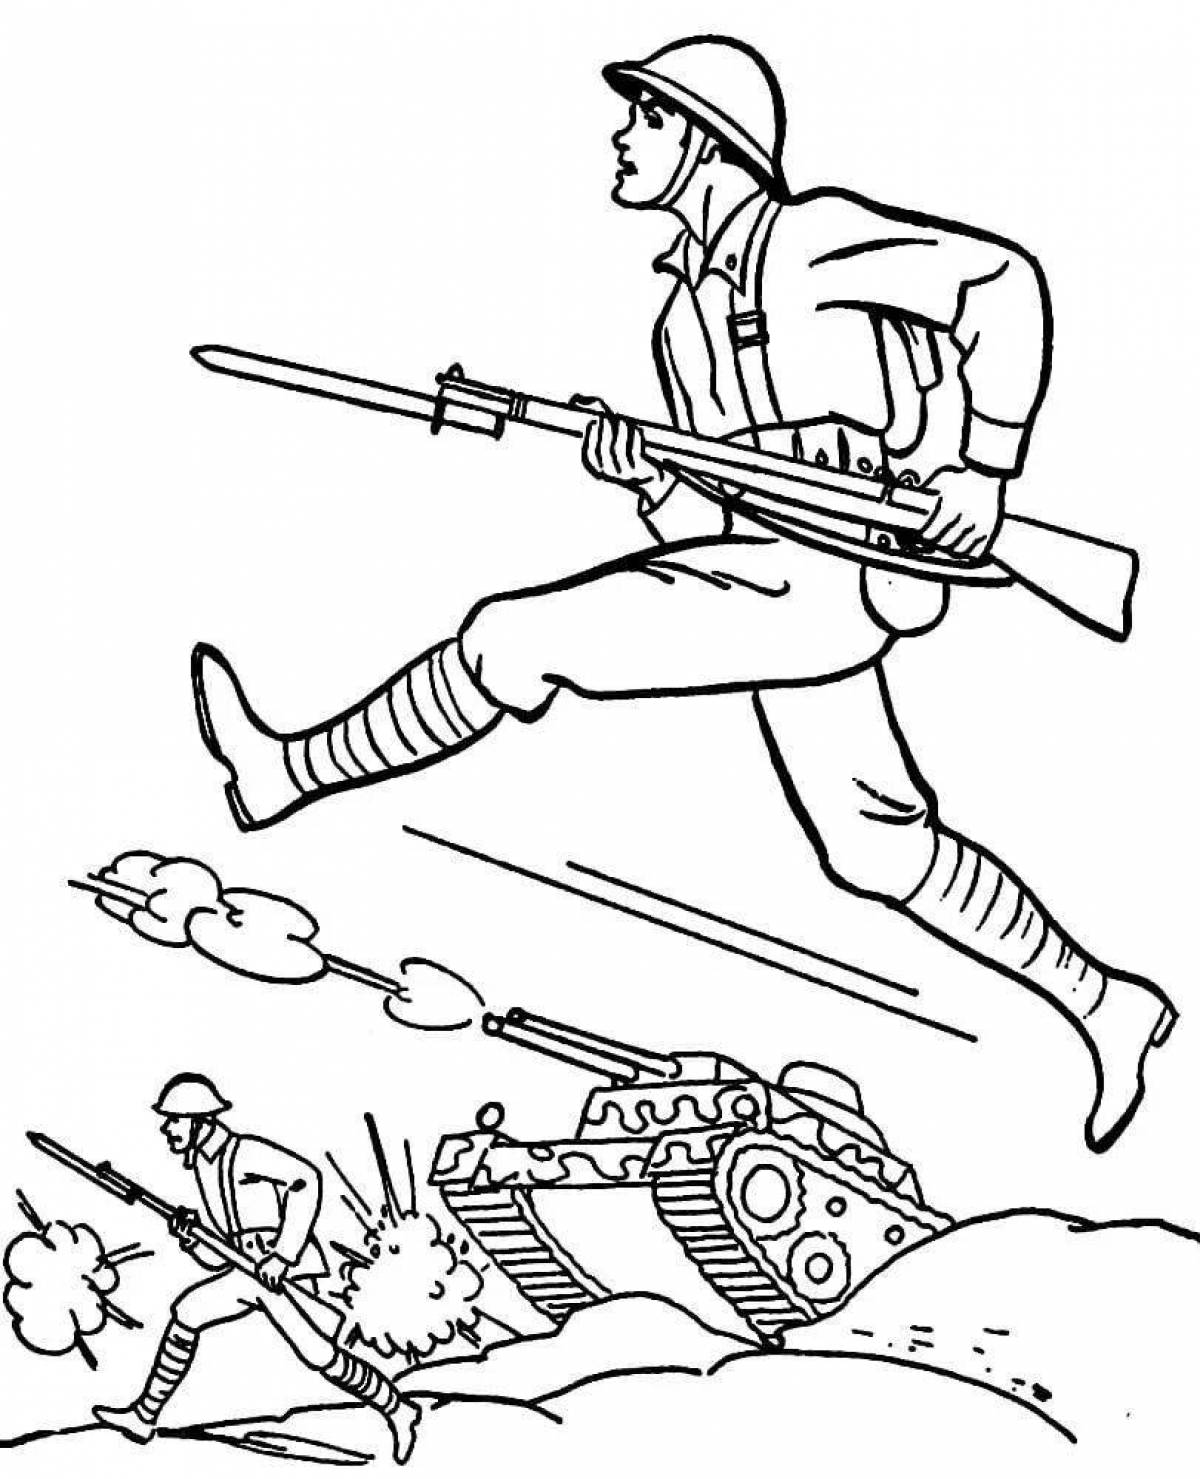 A fun coloring book for kids with a soldier and a tank